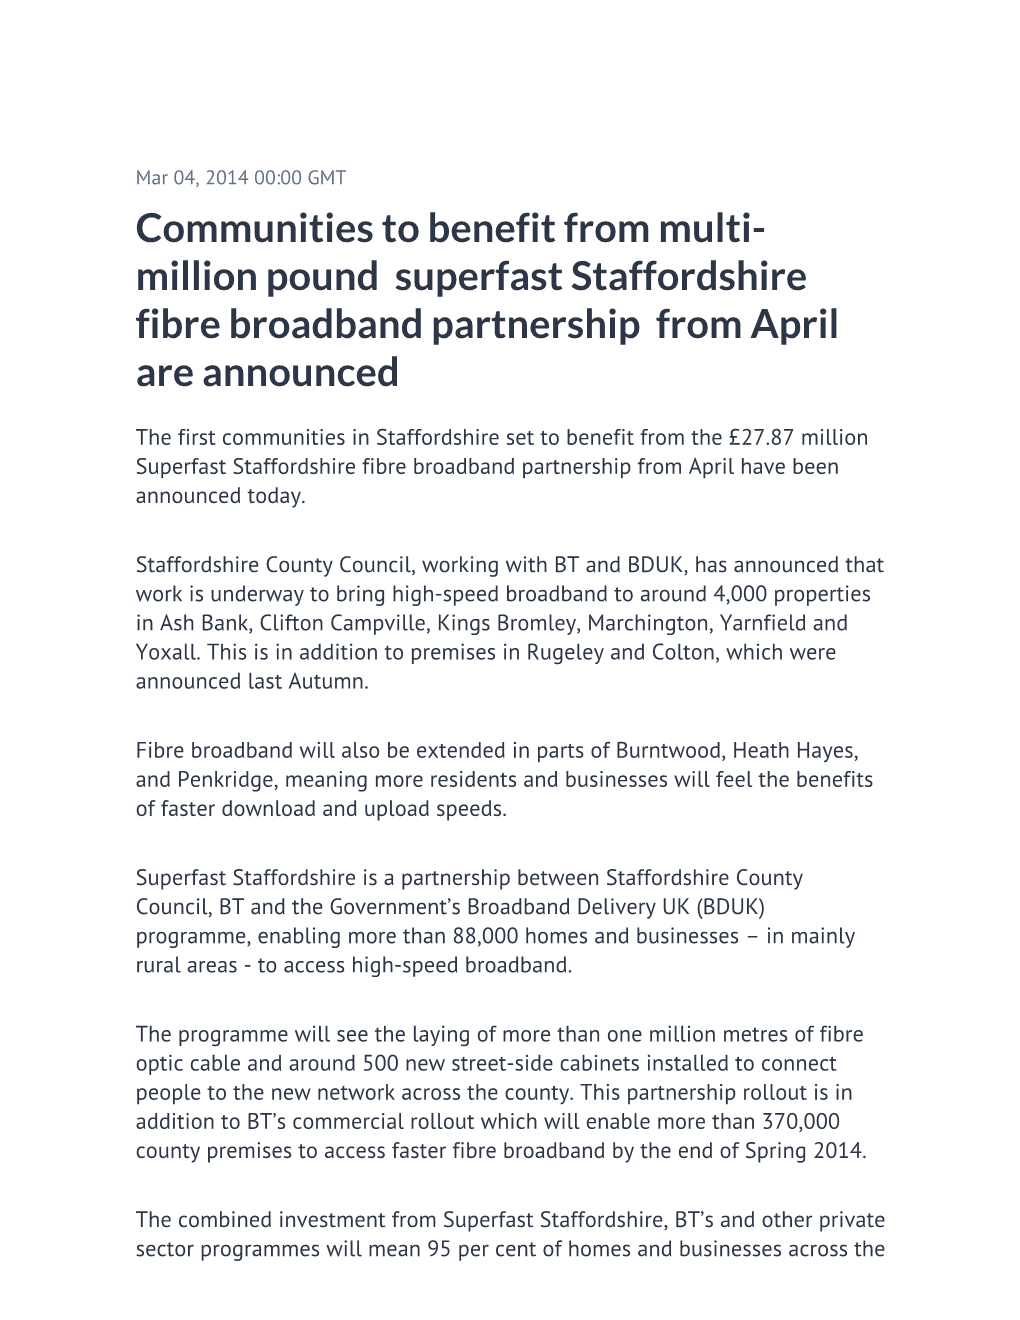 Communities to Benefit from Multi-Million Pound Superfast